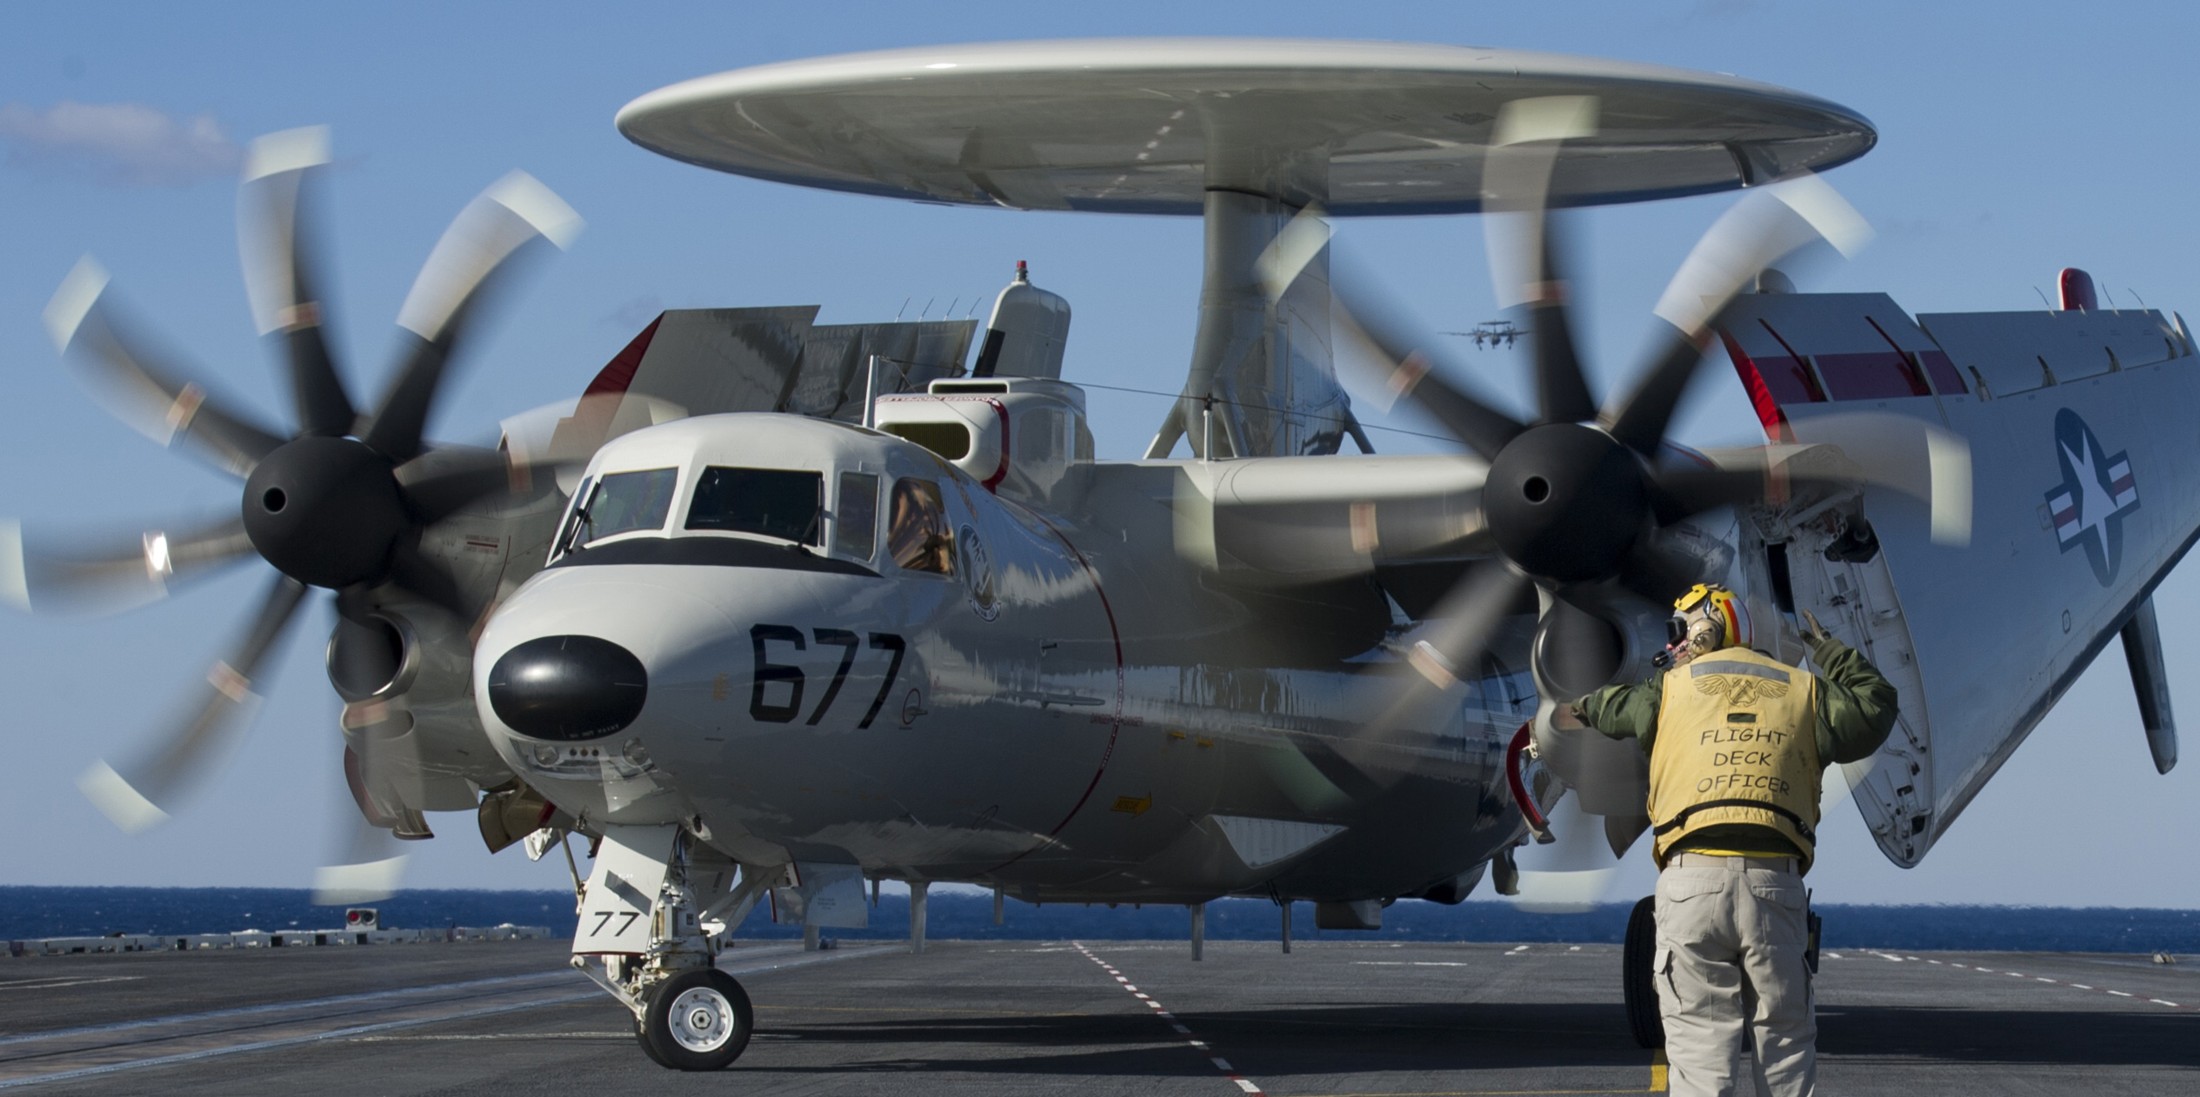 vaw-120 greyhawks carrier airborne early warning squadron e-2d advanced hawkeye replacement uss harry s. truman cvn-75 69